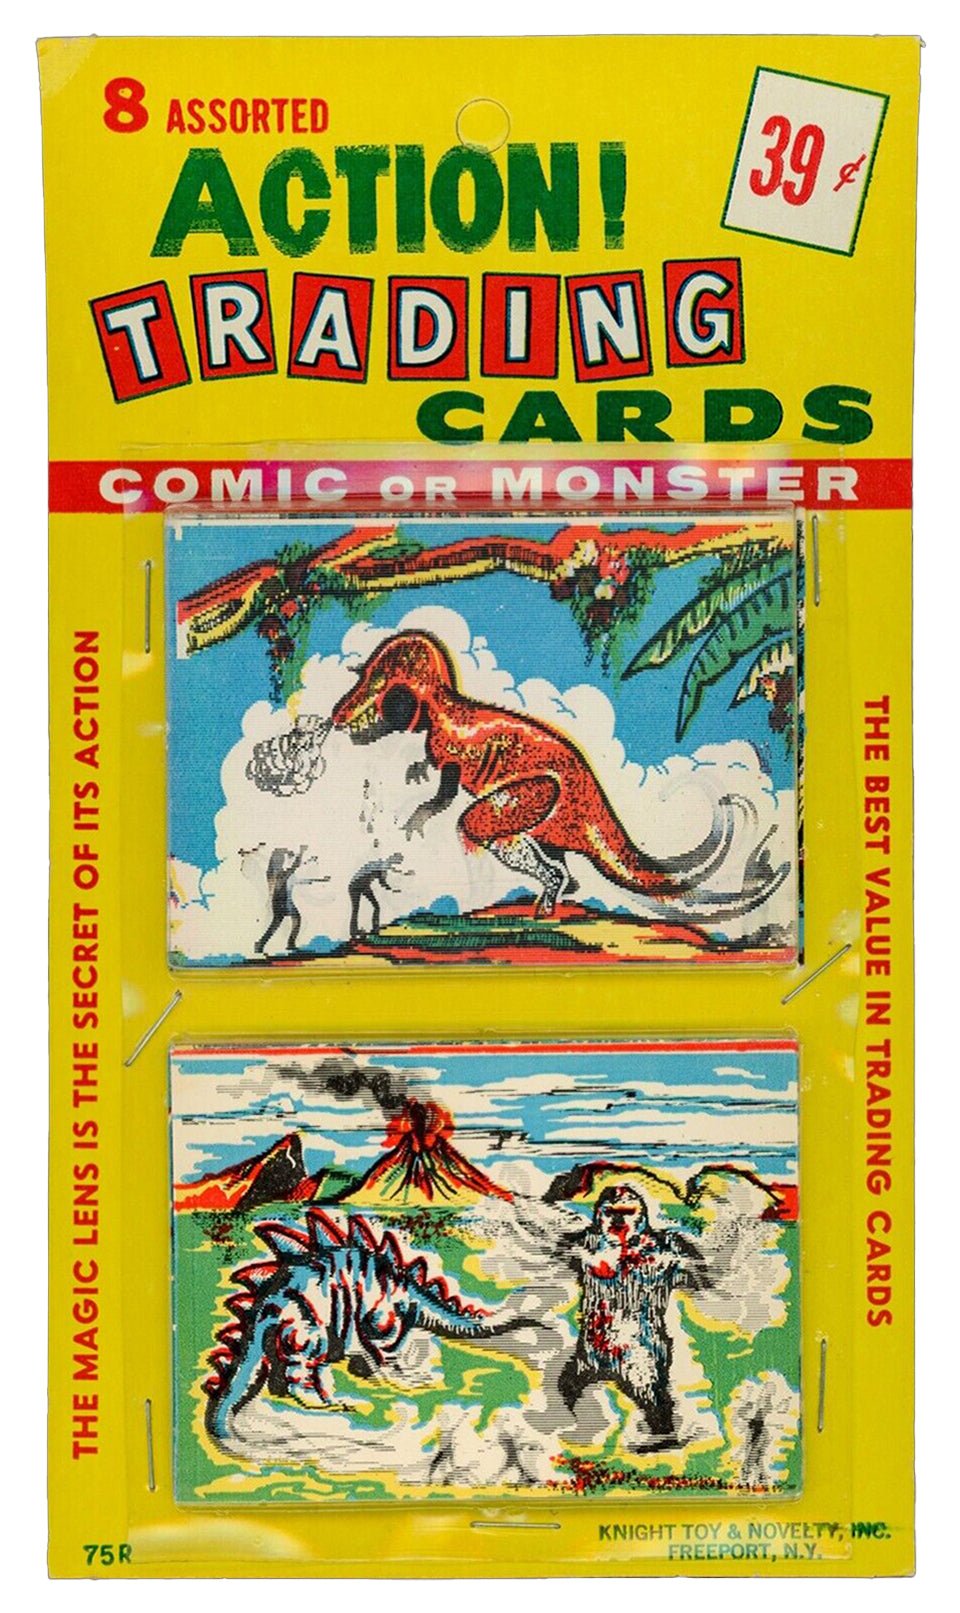 1963 Comic or Monster Action! Trading Cards Knight Toy & Novelty Pack Monster Base Sealed Pack - Hobby Gems